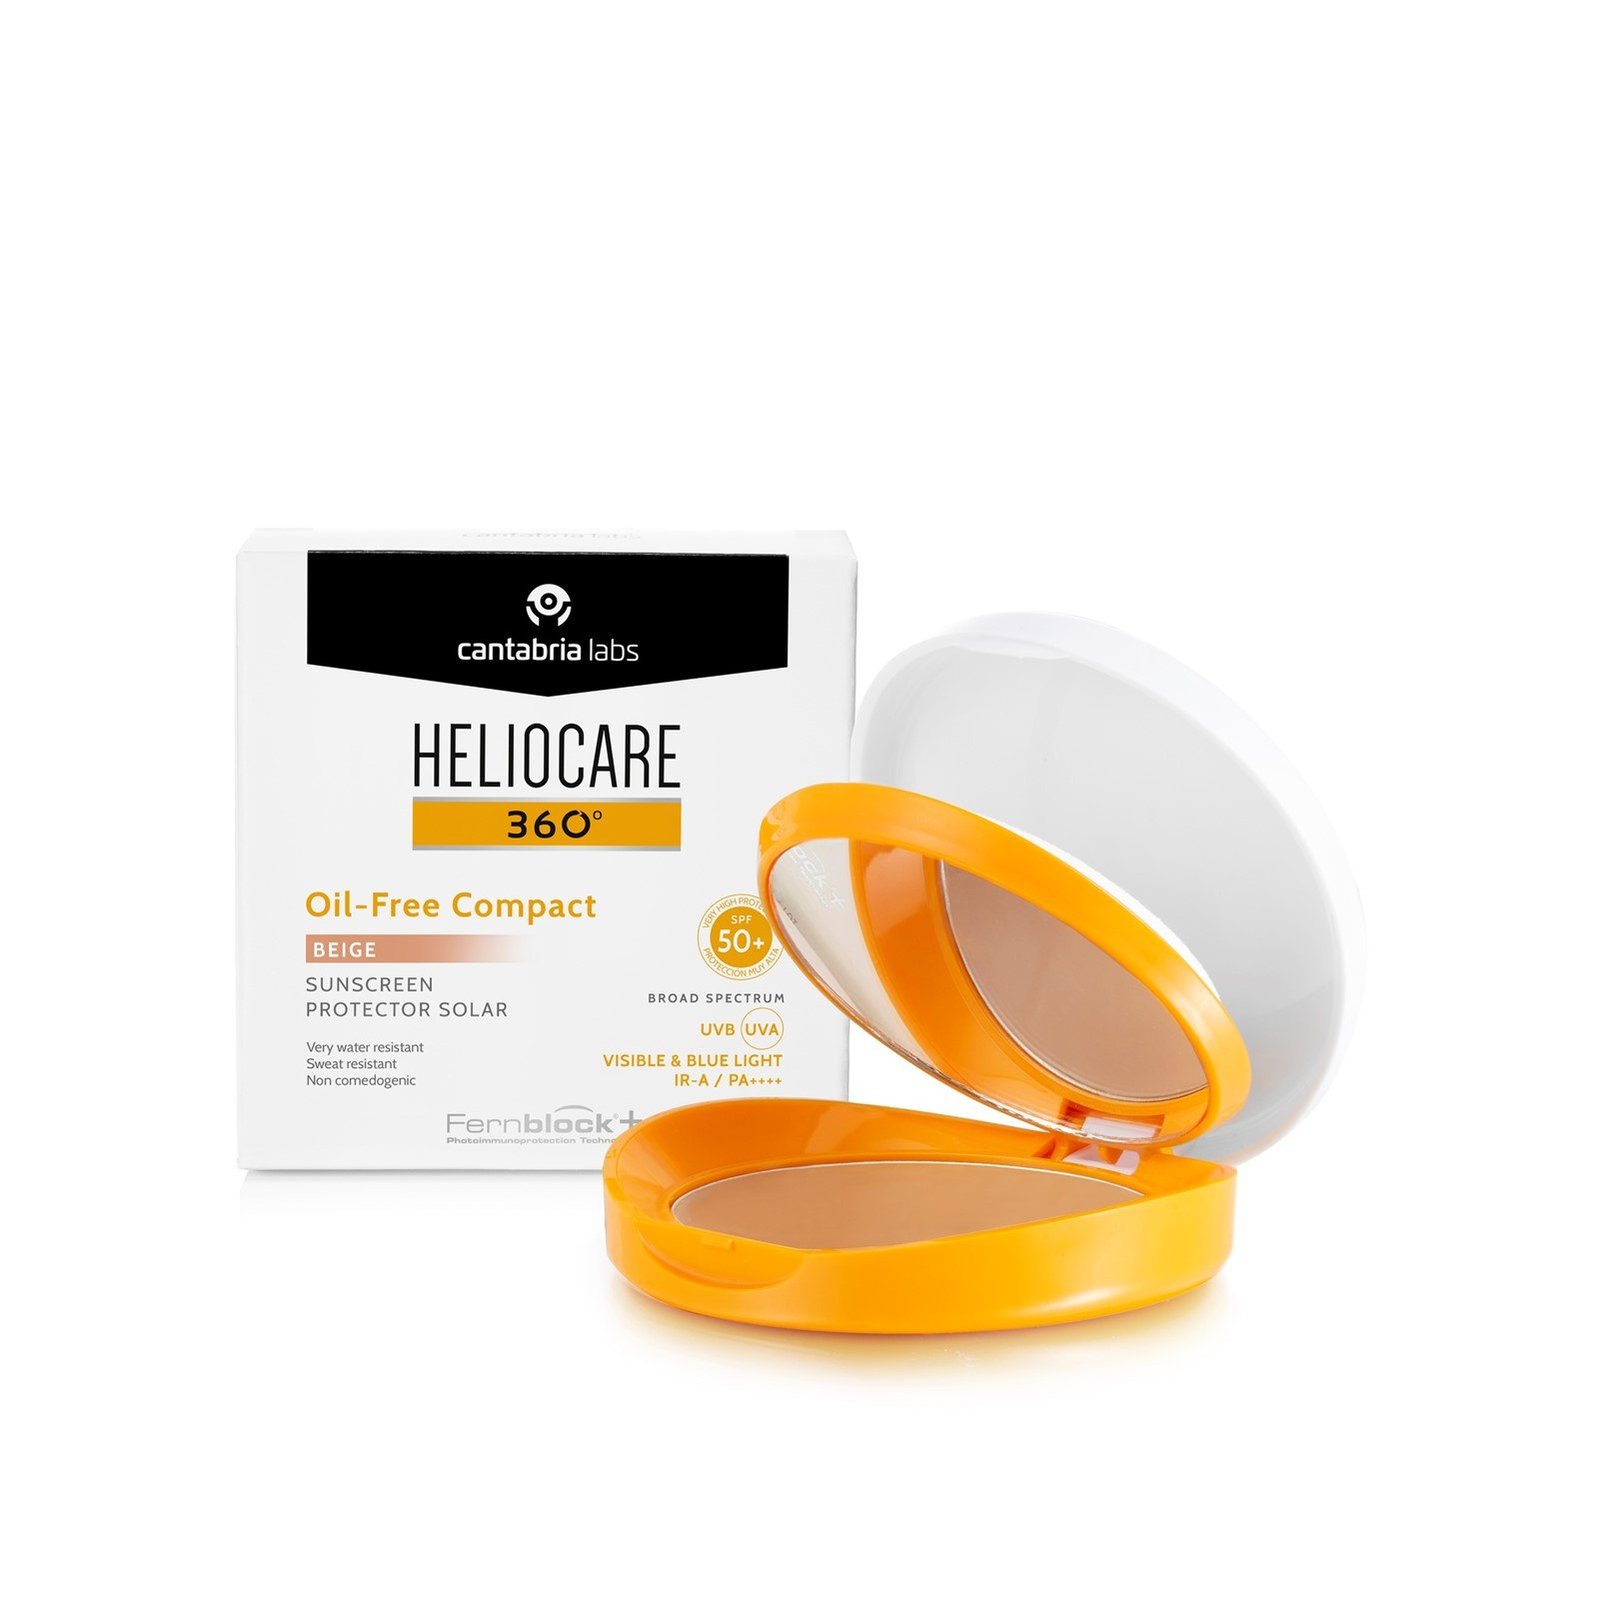 Heliocare 360 Oil-Free Compact Sunscreen SPF50+ Beige 10g